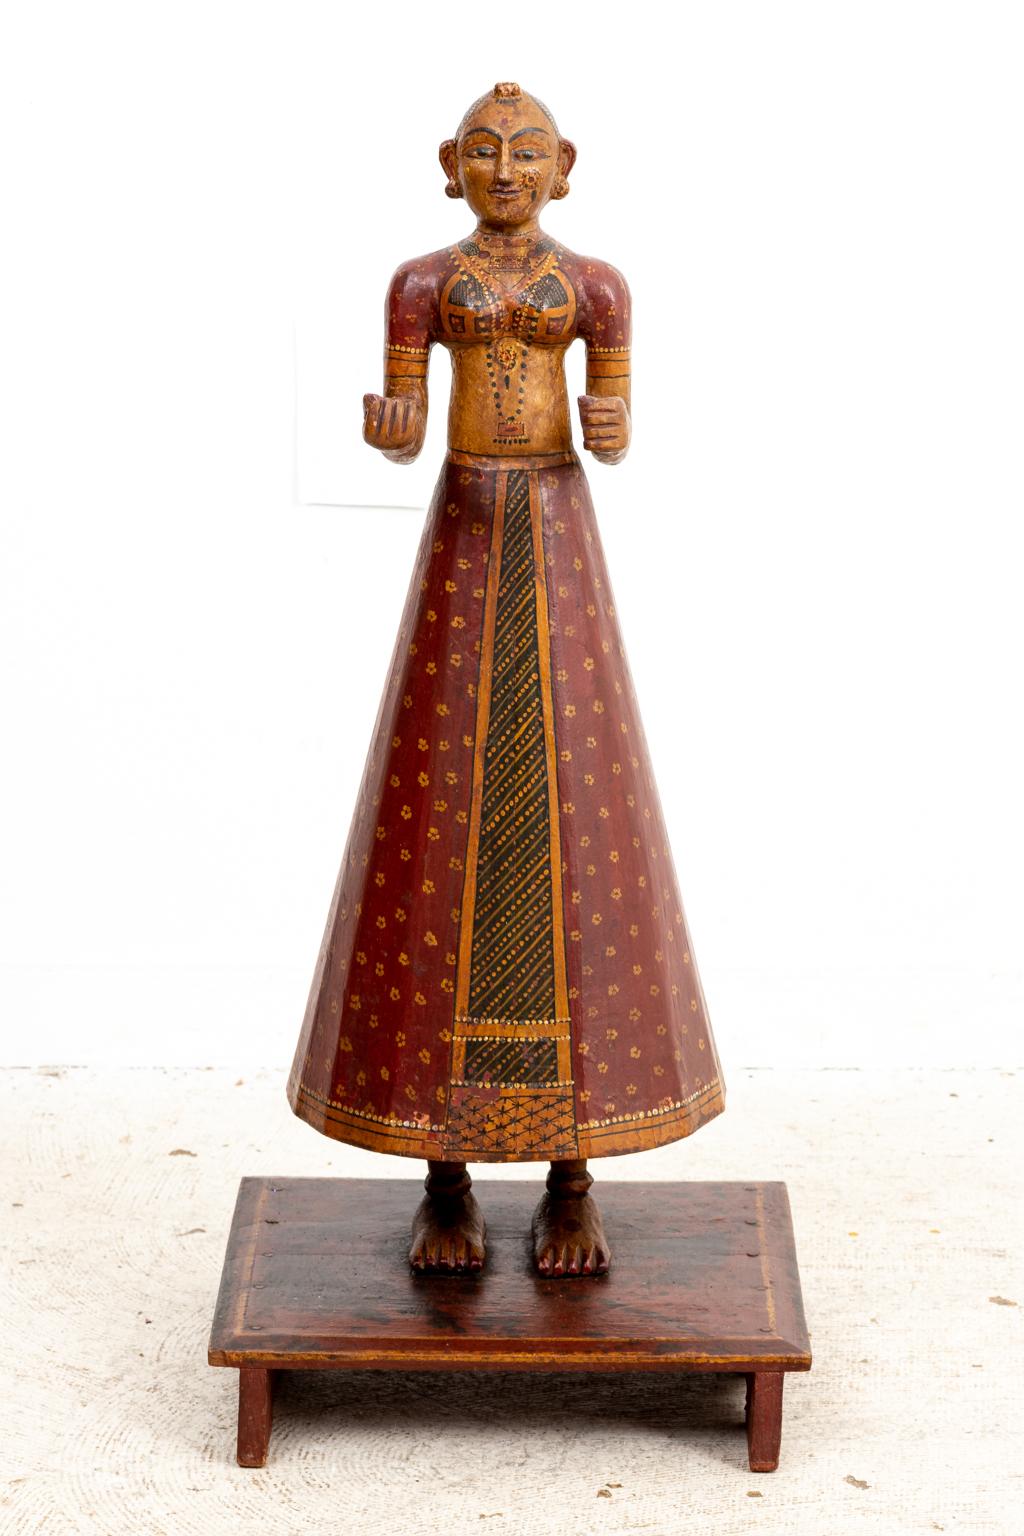 Circa mid-19th century Pair of male and female painted wood figures composed of polychrome painted wood in highly detailed dress. The figures were made during the second half of the 19th century in southern India.